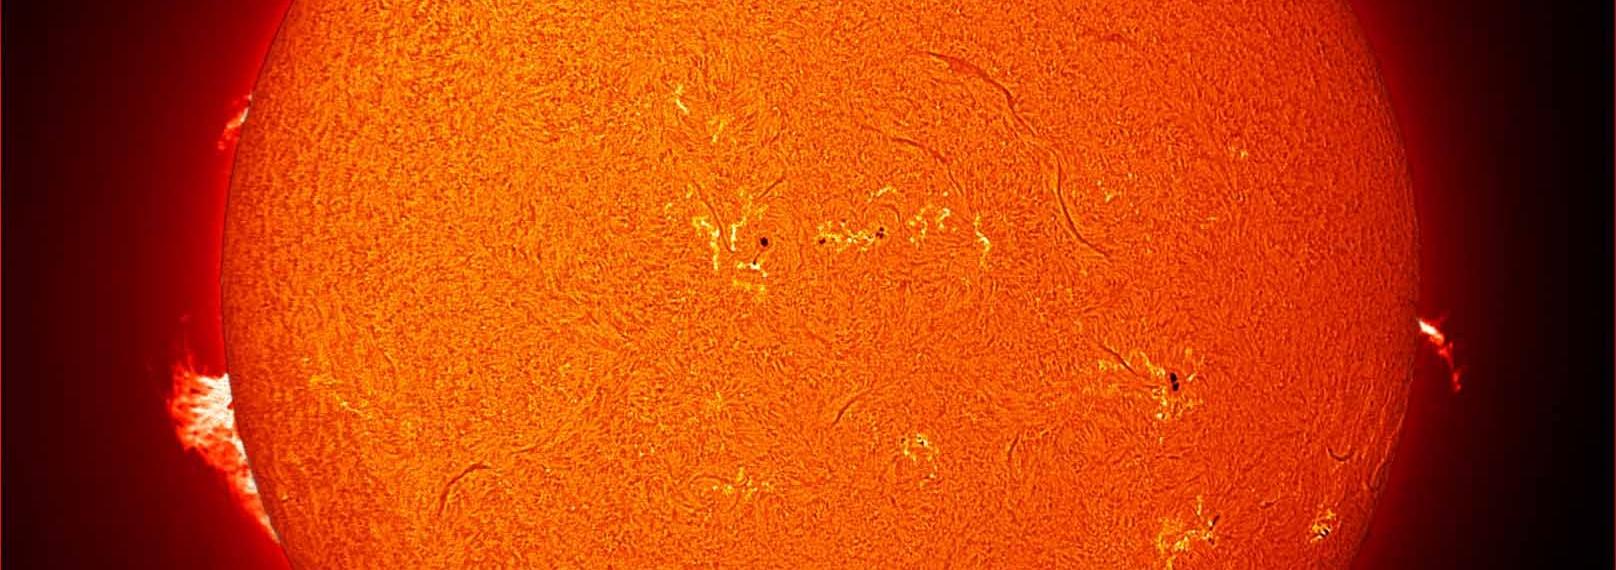 Color image of the Sun from the SCSM observatory, with multiple sunspots and prominences